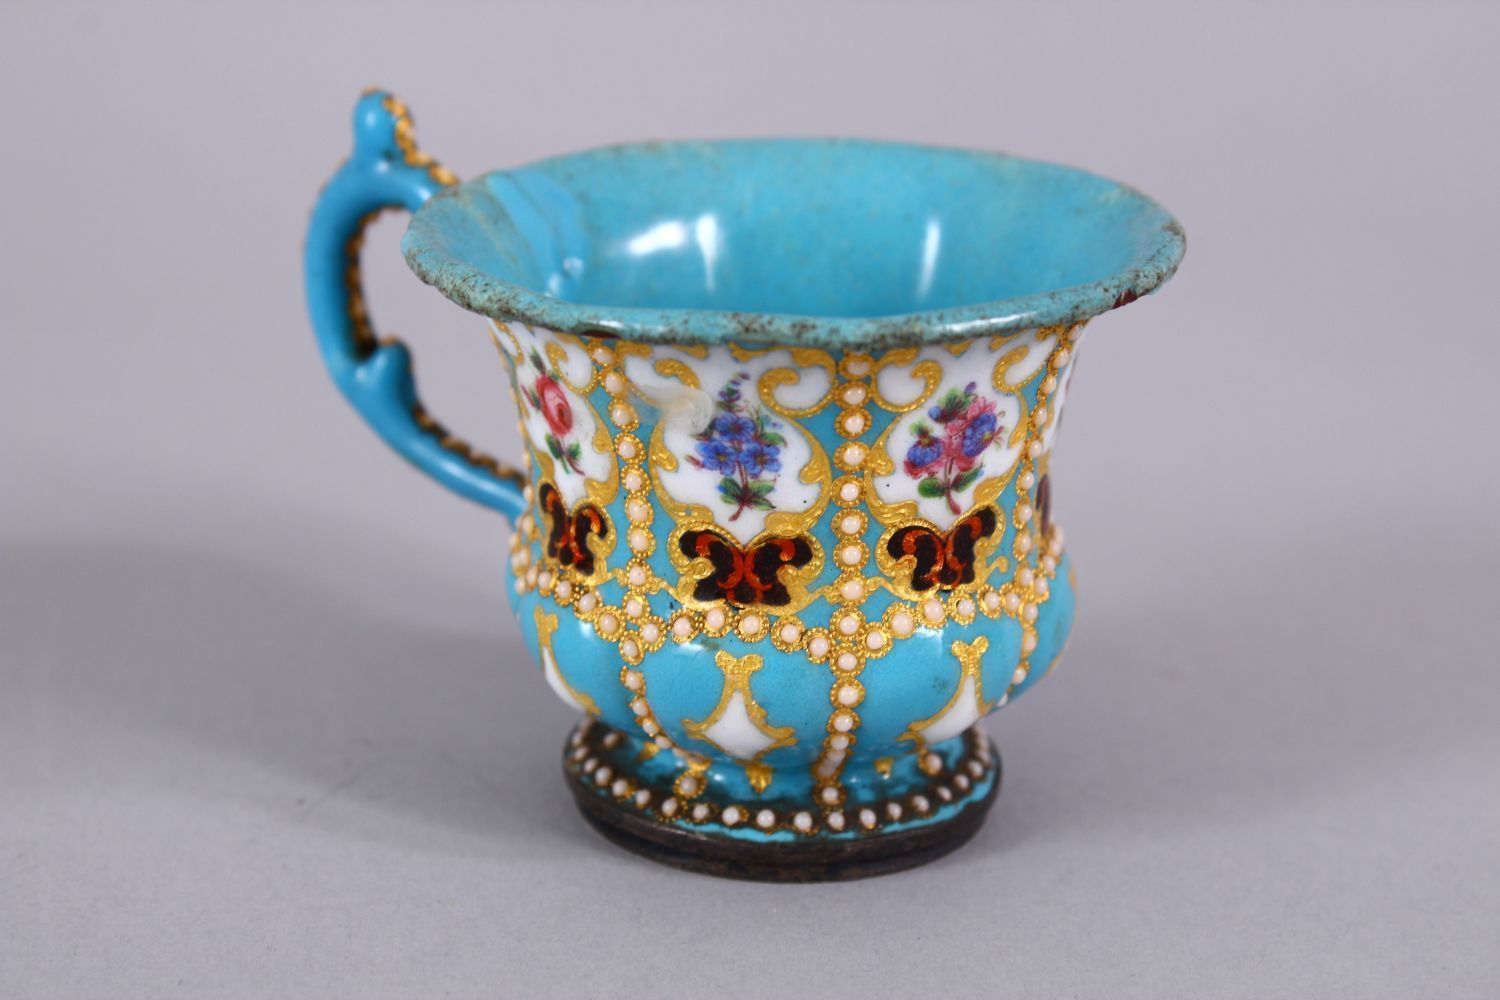 A FINE 19TH CENTURY OTTOMAN OR OTTOMAN MARKET ENAMELLED CUP AND SAUCER, with finely painted panels - Image 2 of 8